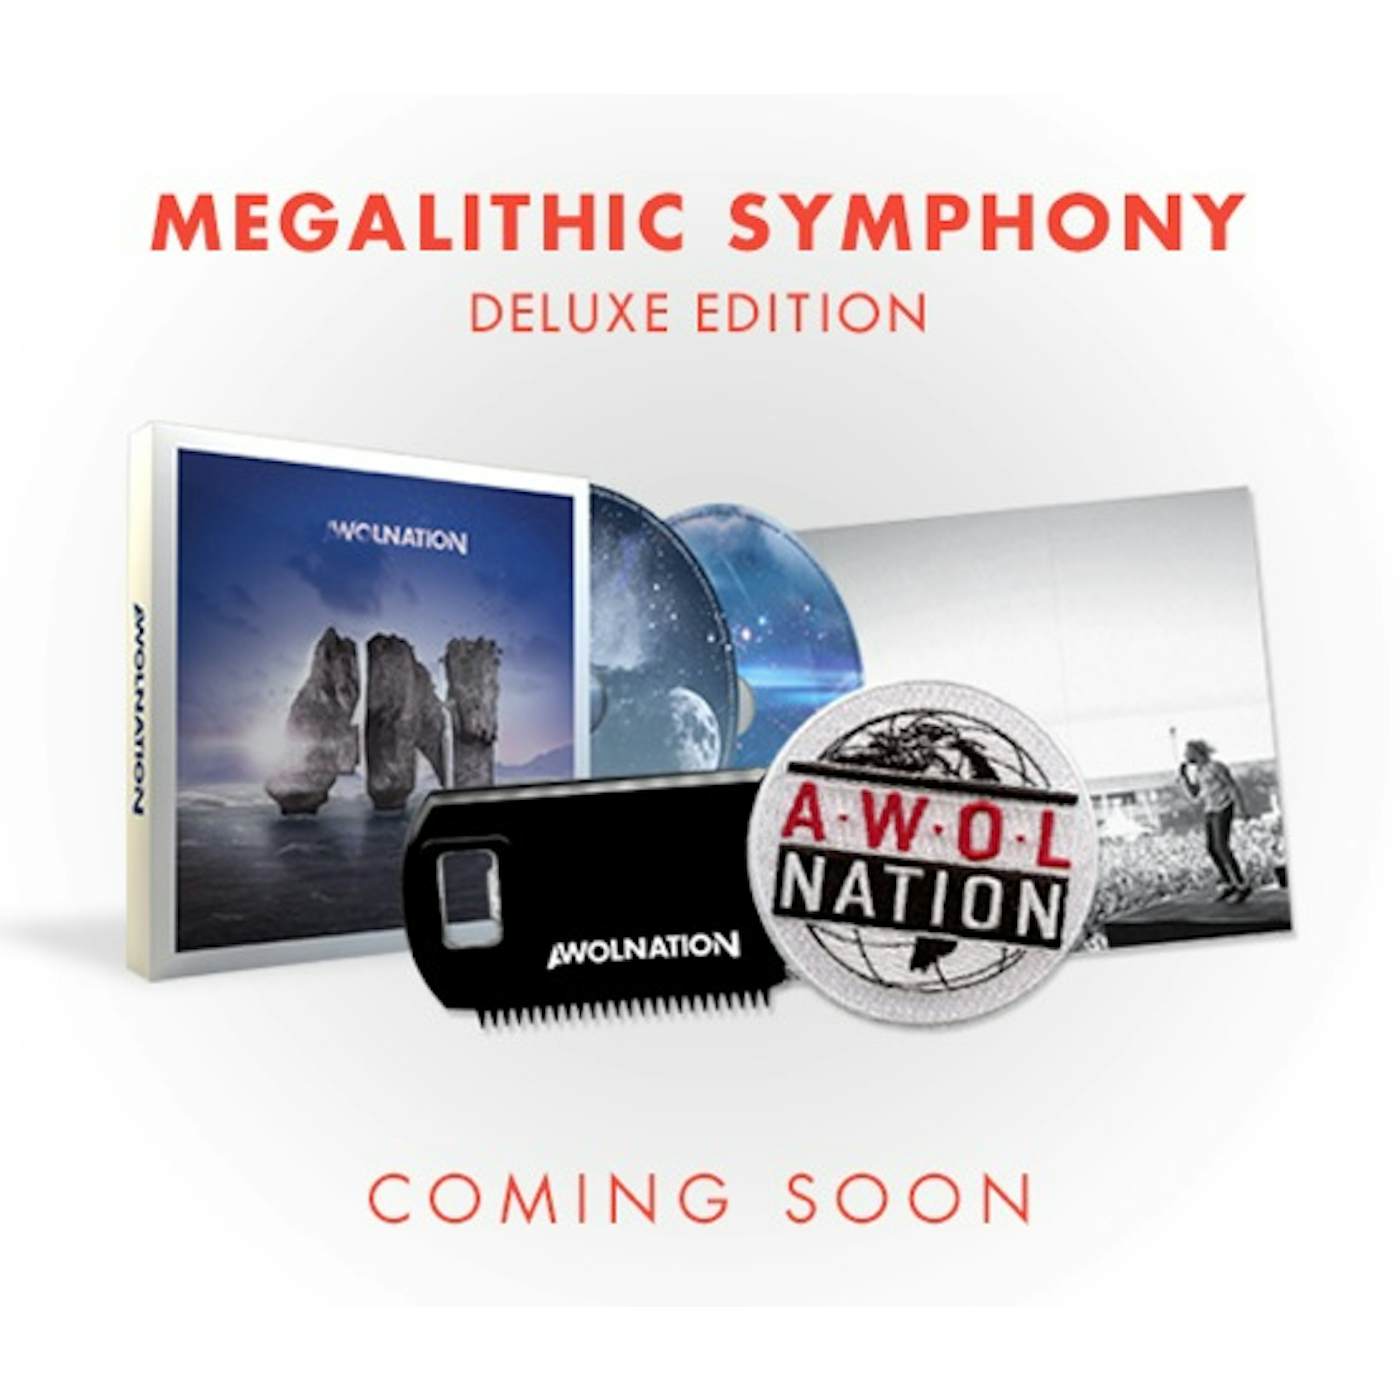 AWOLNATION MEGALITHIC SYMPHONY DELUXE CD